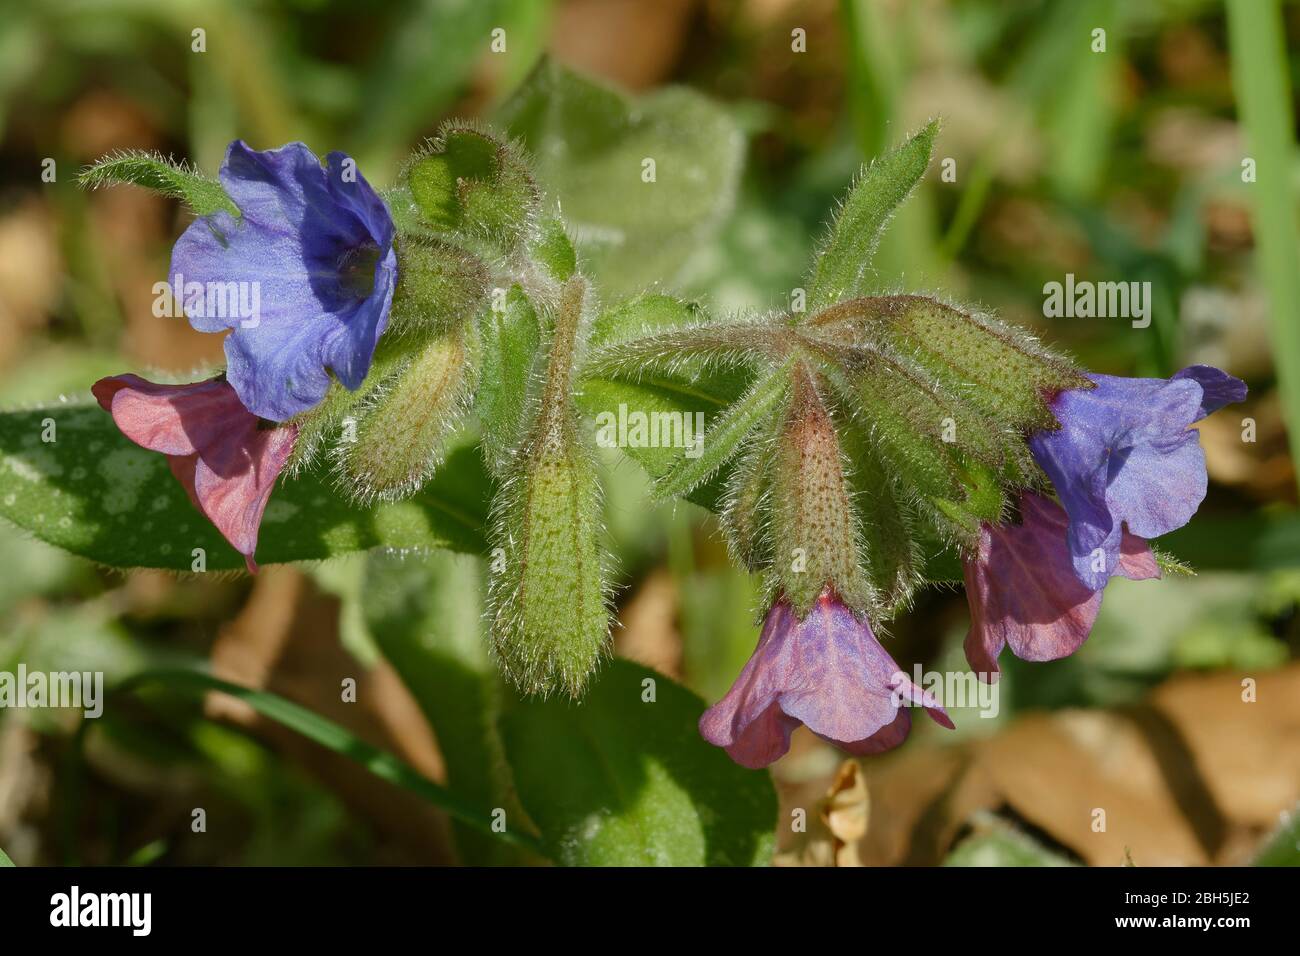 Lungwort - Pulmonaria officinalis  Garden excape flower with spotted leaves Stock Photo